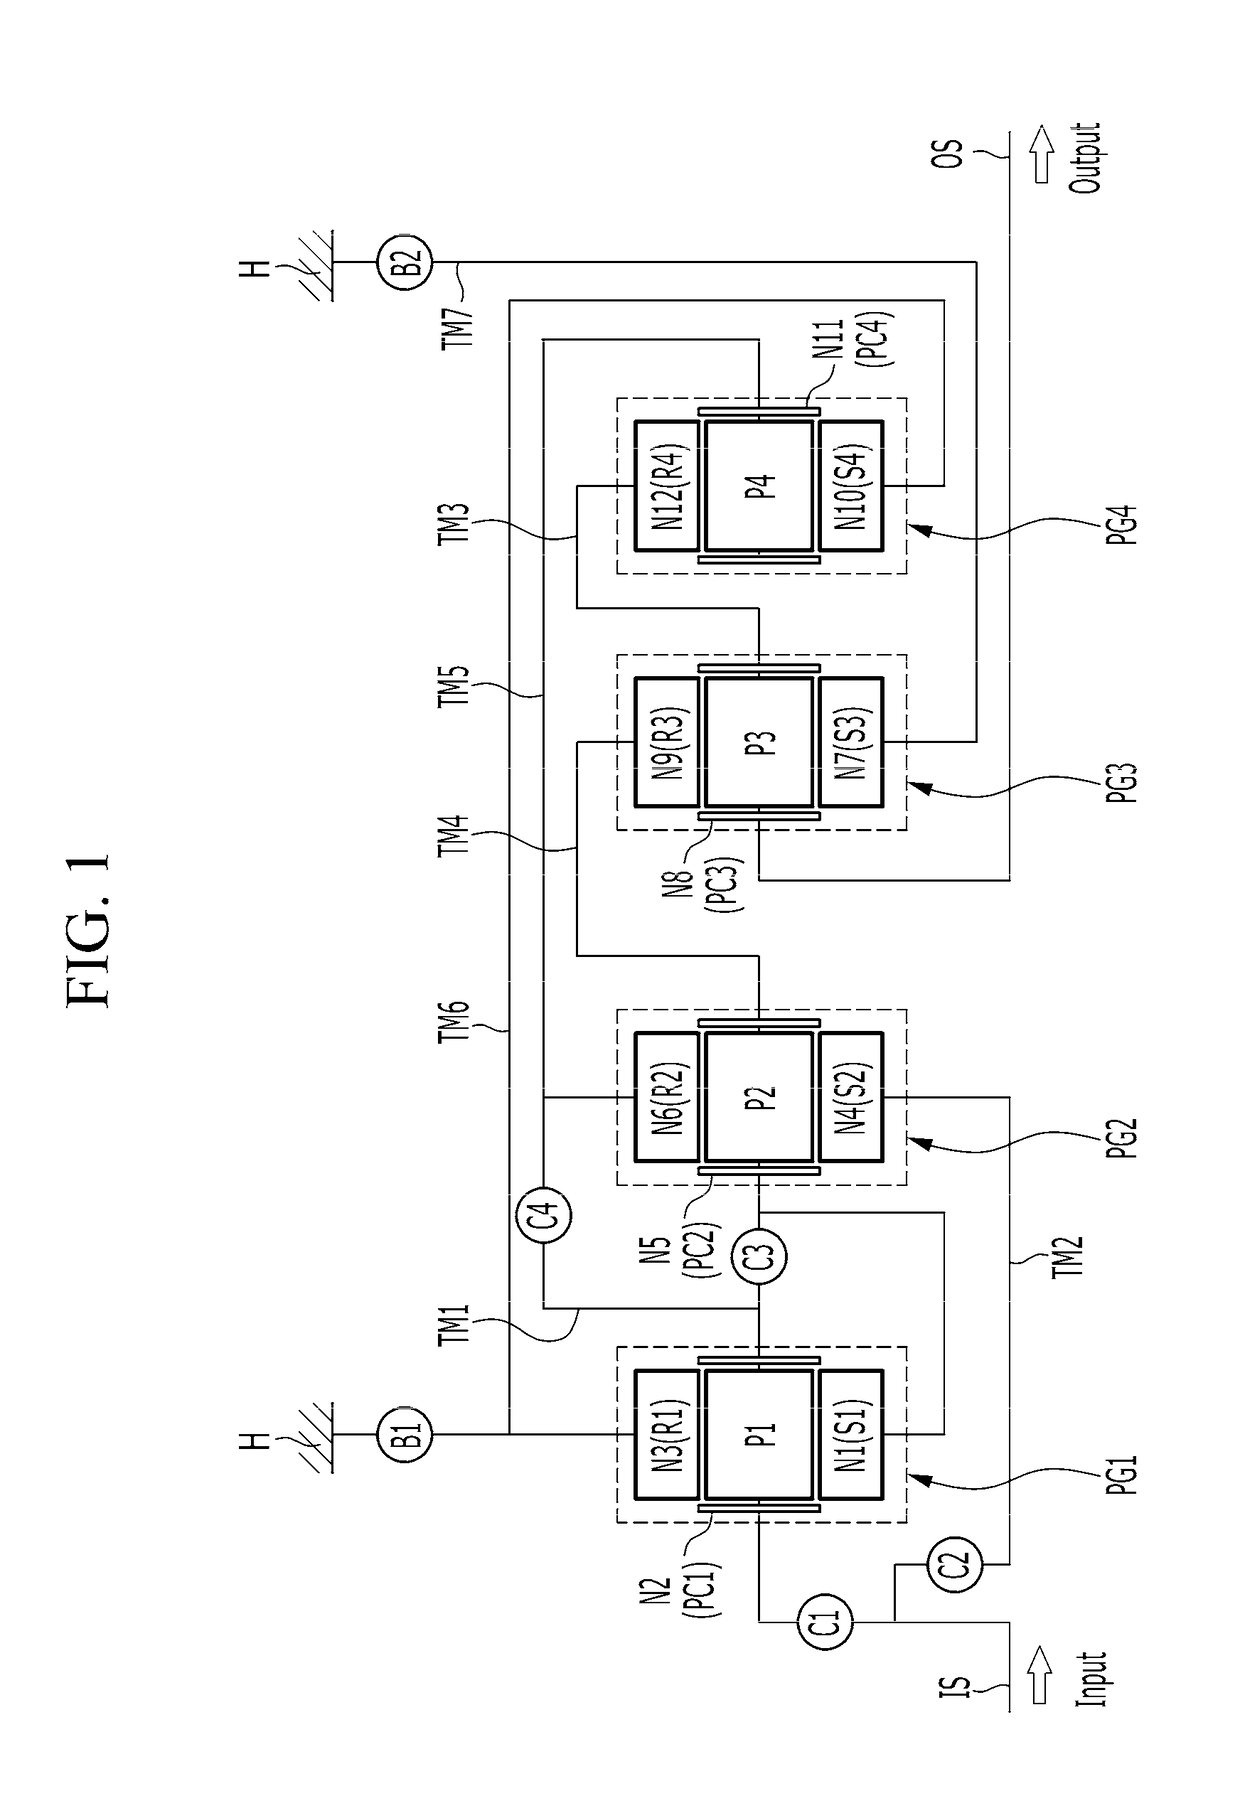 Planetary gear train of automatic transmission for vehicle